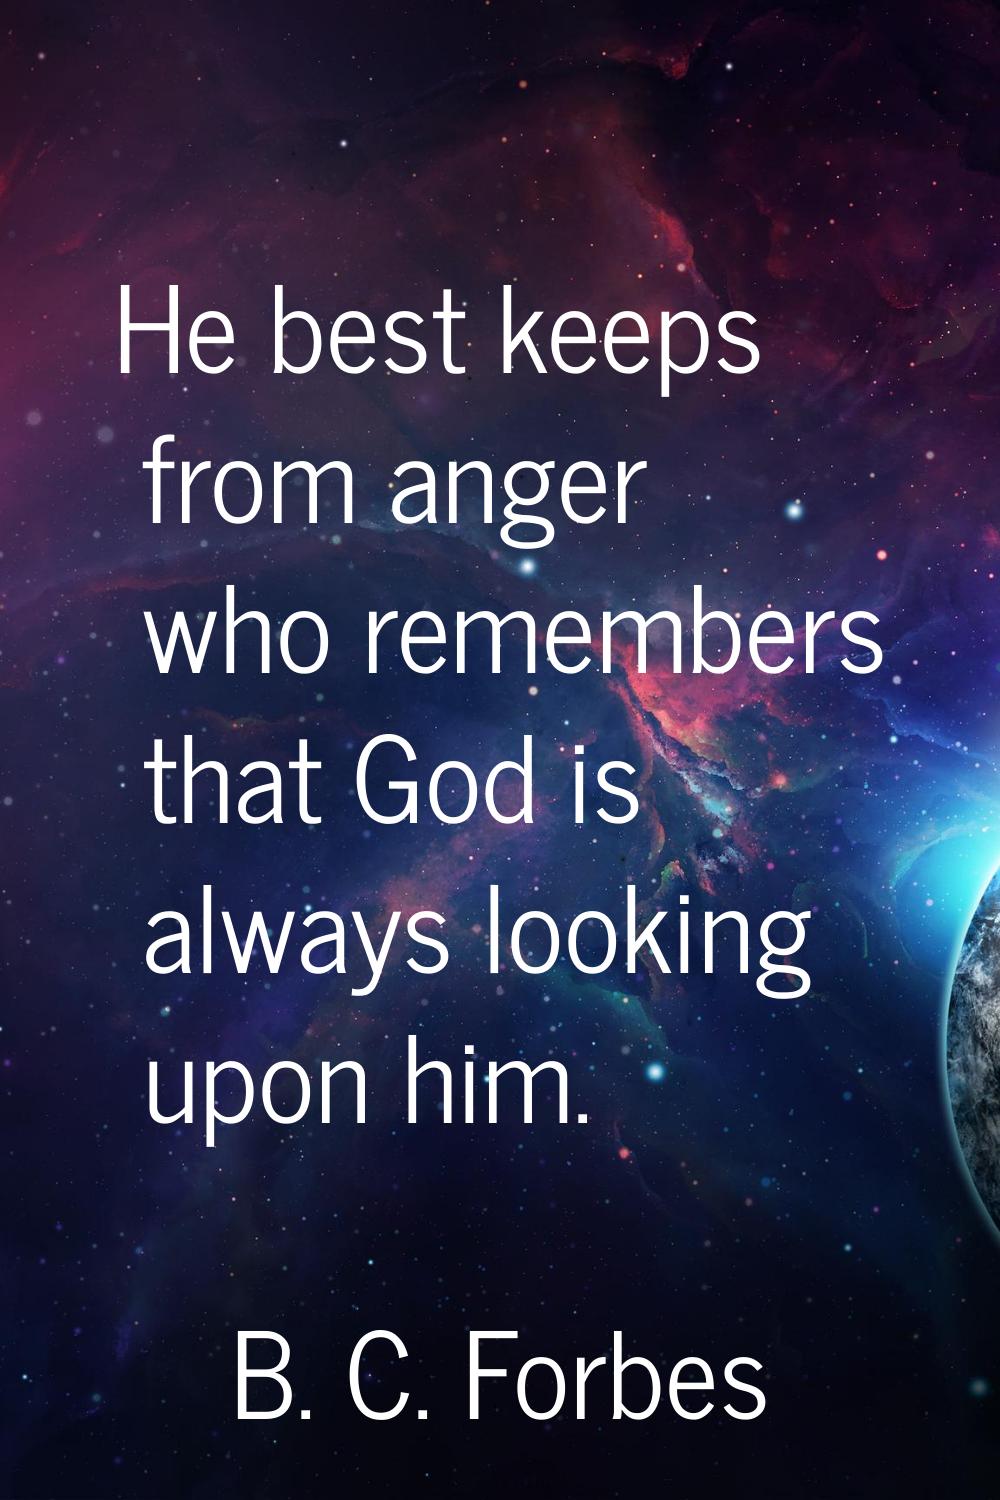 He best keeps from anger who remembers that God is always looking upon him.